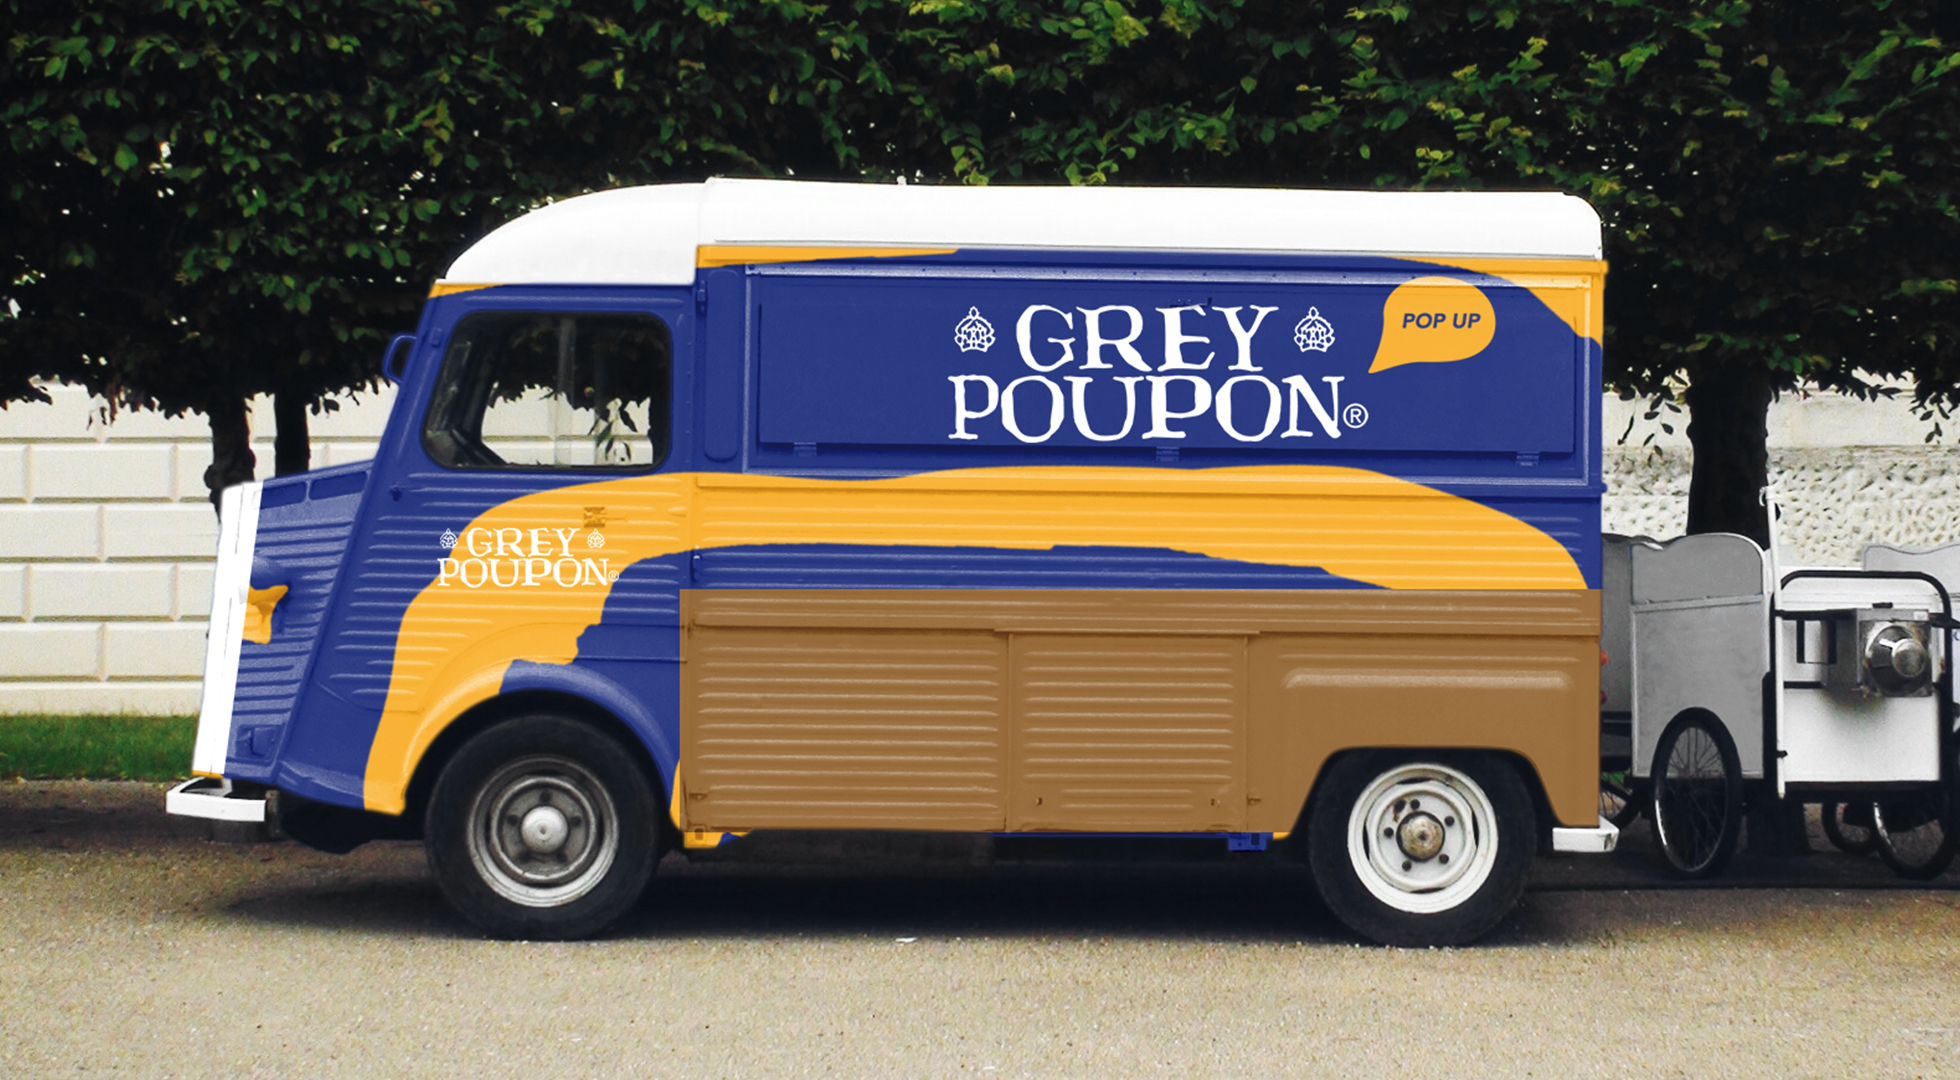 The Grey Poupon food truck covered with illustrations 